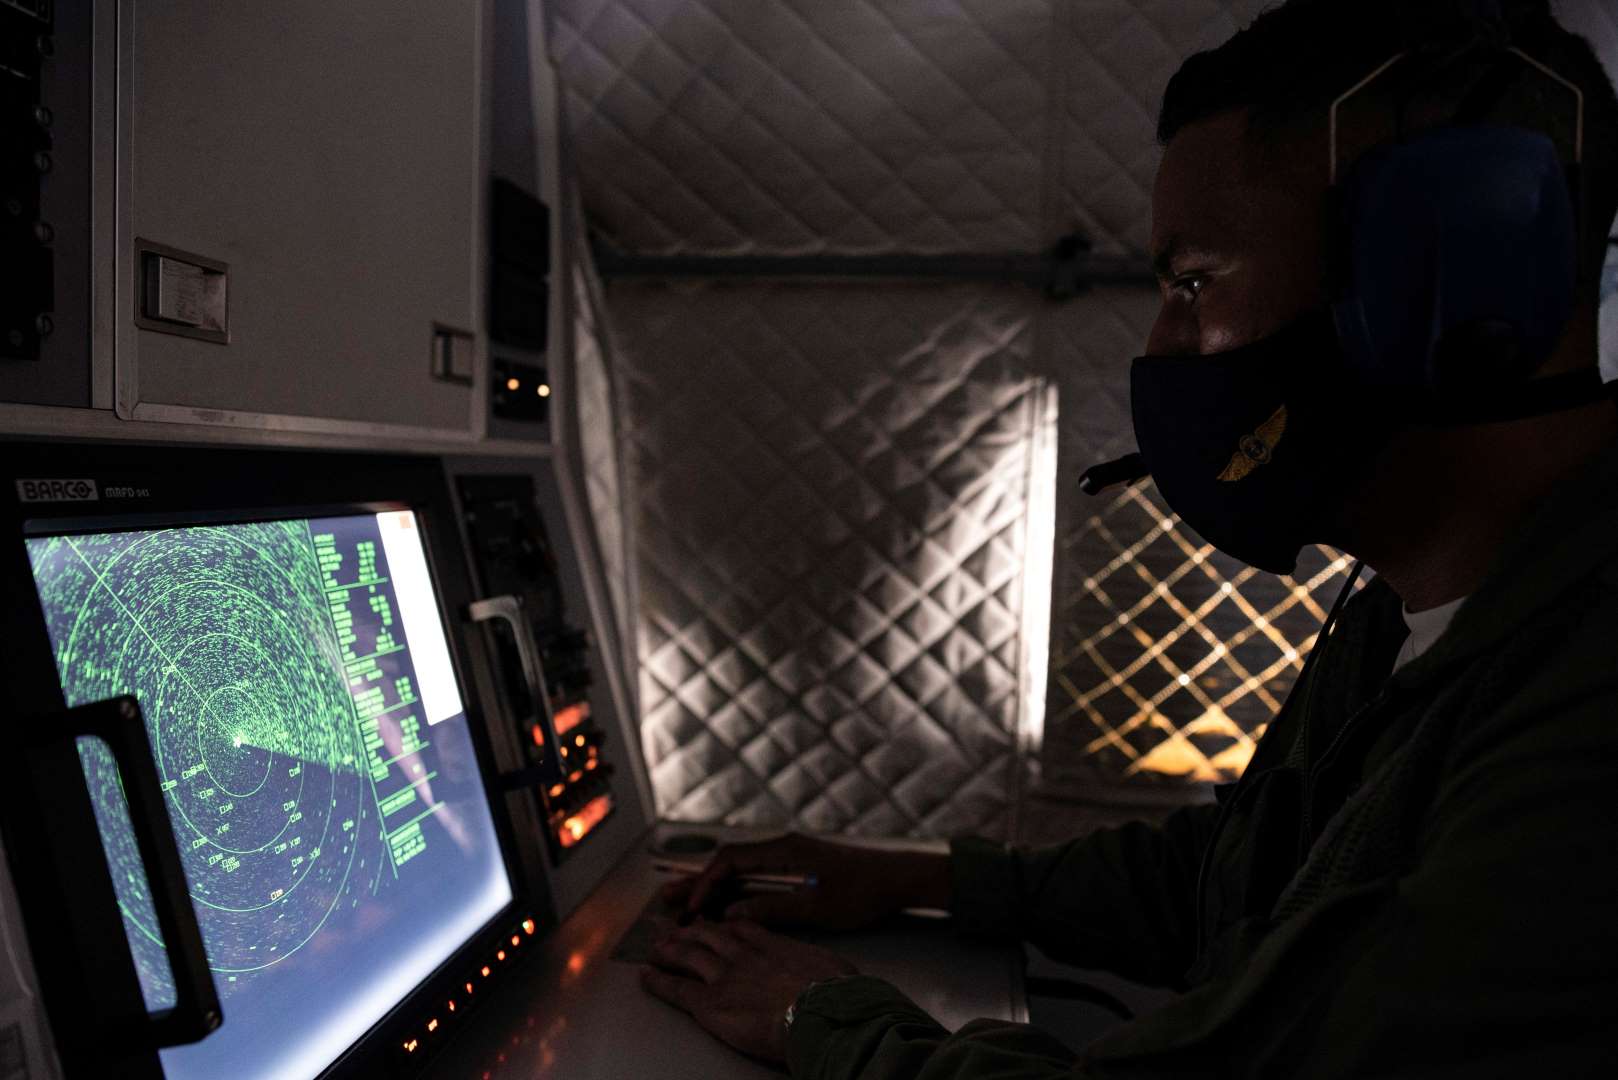 An Ecuadorian navy officer looks at a radar after a fishing fleet of mostly Chinese-flagged ships was detected in an international corridor that borders the Galapagos Islands' exclusive economic zone, in the Pacific Ocean, on 7 August 2020. Photo: Santiago Arcos / Reuters